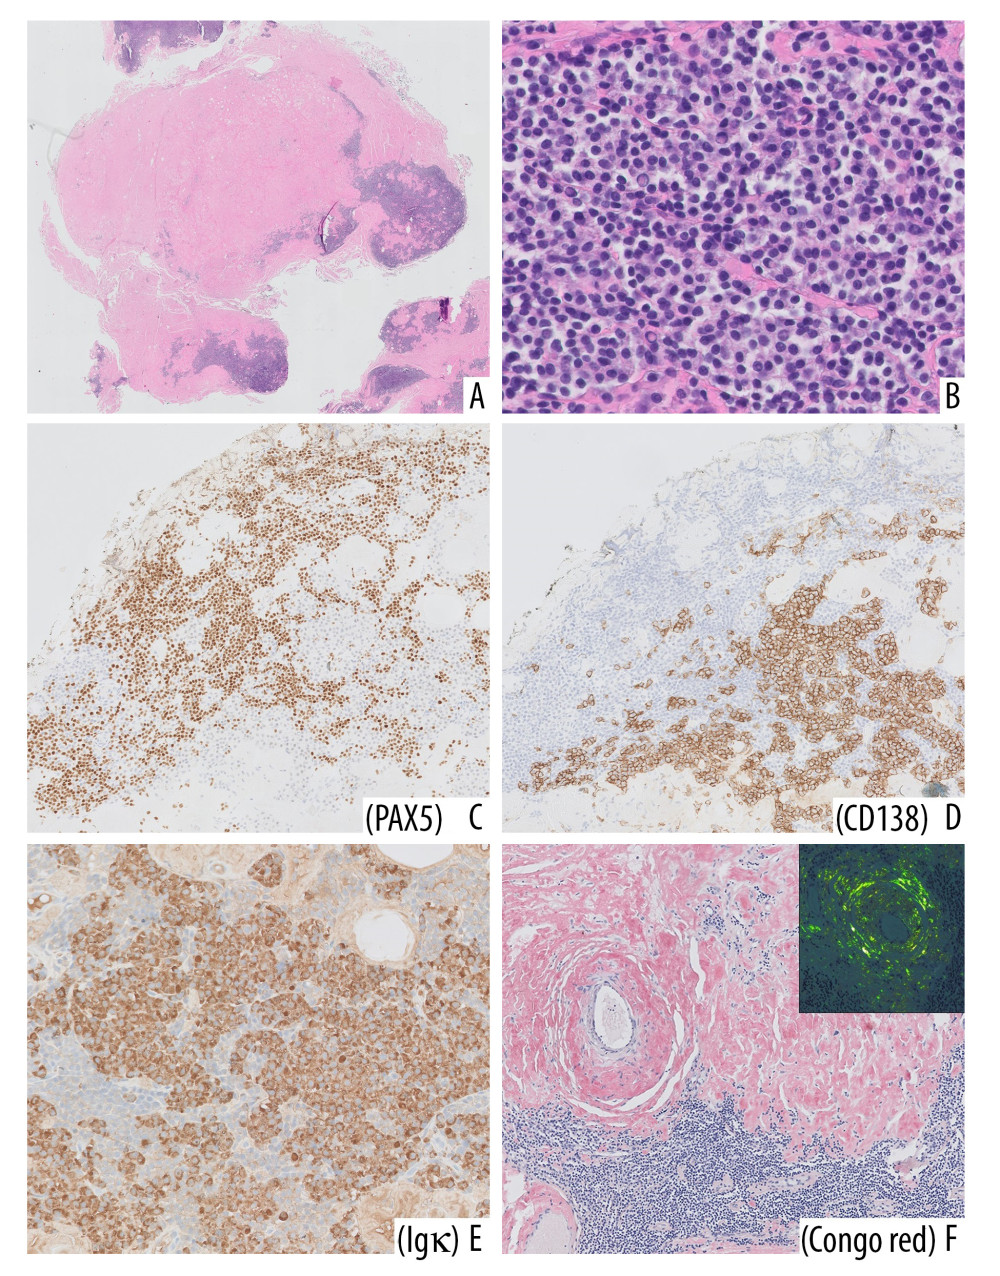 Histological and immunohistochemical features of the second excised elbow lesion. Even at low-power overview, the histopathological picture of the second sample (A: H&E ×50) clearly overlaps with that of the previously excised nodule, showing the tumor-like deposit of glassy pink amorphous material admixed with and focally overgrowing a lymphoplasmacytic infiltrate composed of small lymphocytes, plasma cells, and plasmacytoid lymphocytes, with numerous Dutcher bodies (B: H&E ×200). By immunohistochemistry, numerous PAX5+ B cells (C: PAX5 IHC ×100) are found in association with CD138+ plasmacytic cells (D: CD138 IHC ×100), and both cellular populations demonstrate Ig κ light-chain restriction (E: Ig k IHC ×200). As in the previous biopsy, the positivity for Congo red stain (F: ×100) and related apple-green birefringence under polarized light (inset: ×200) confirms the material is indeed amyloid.